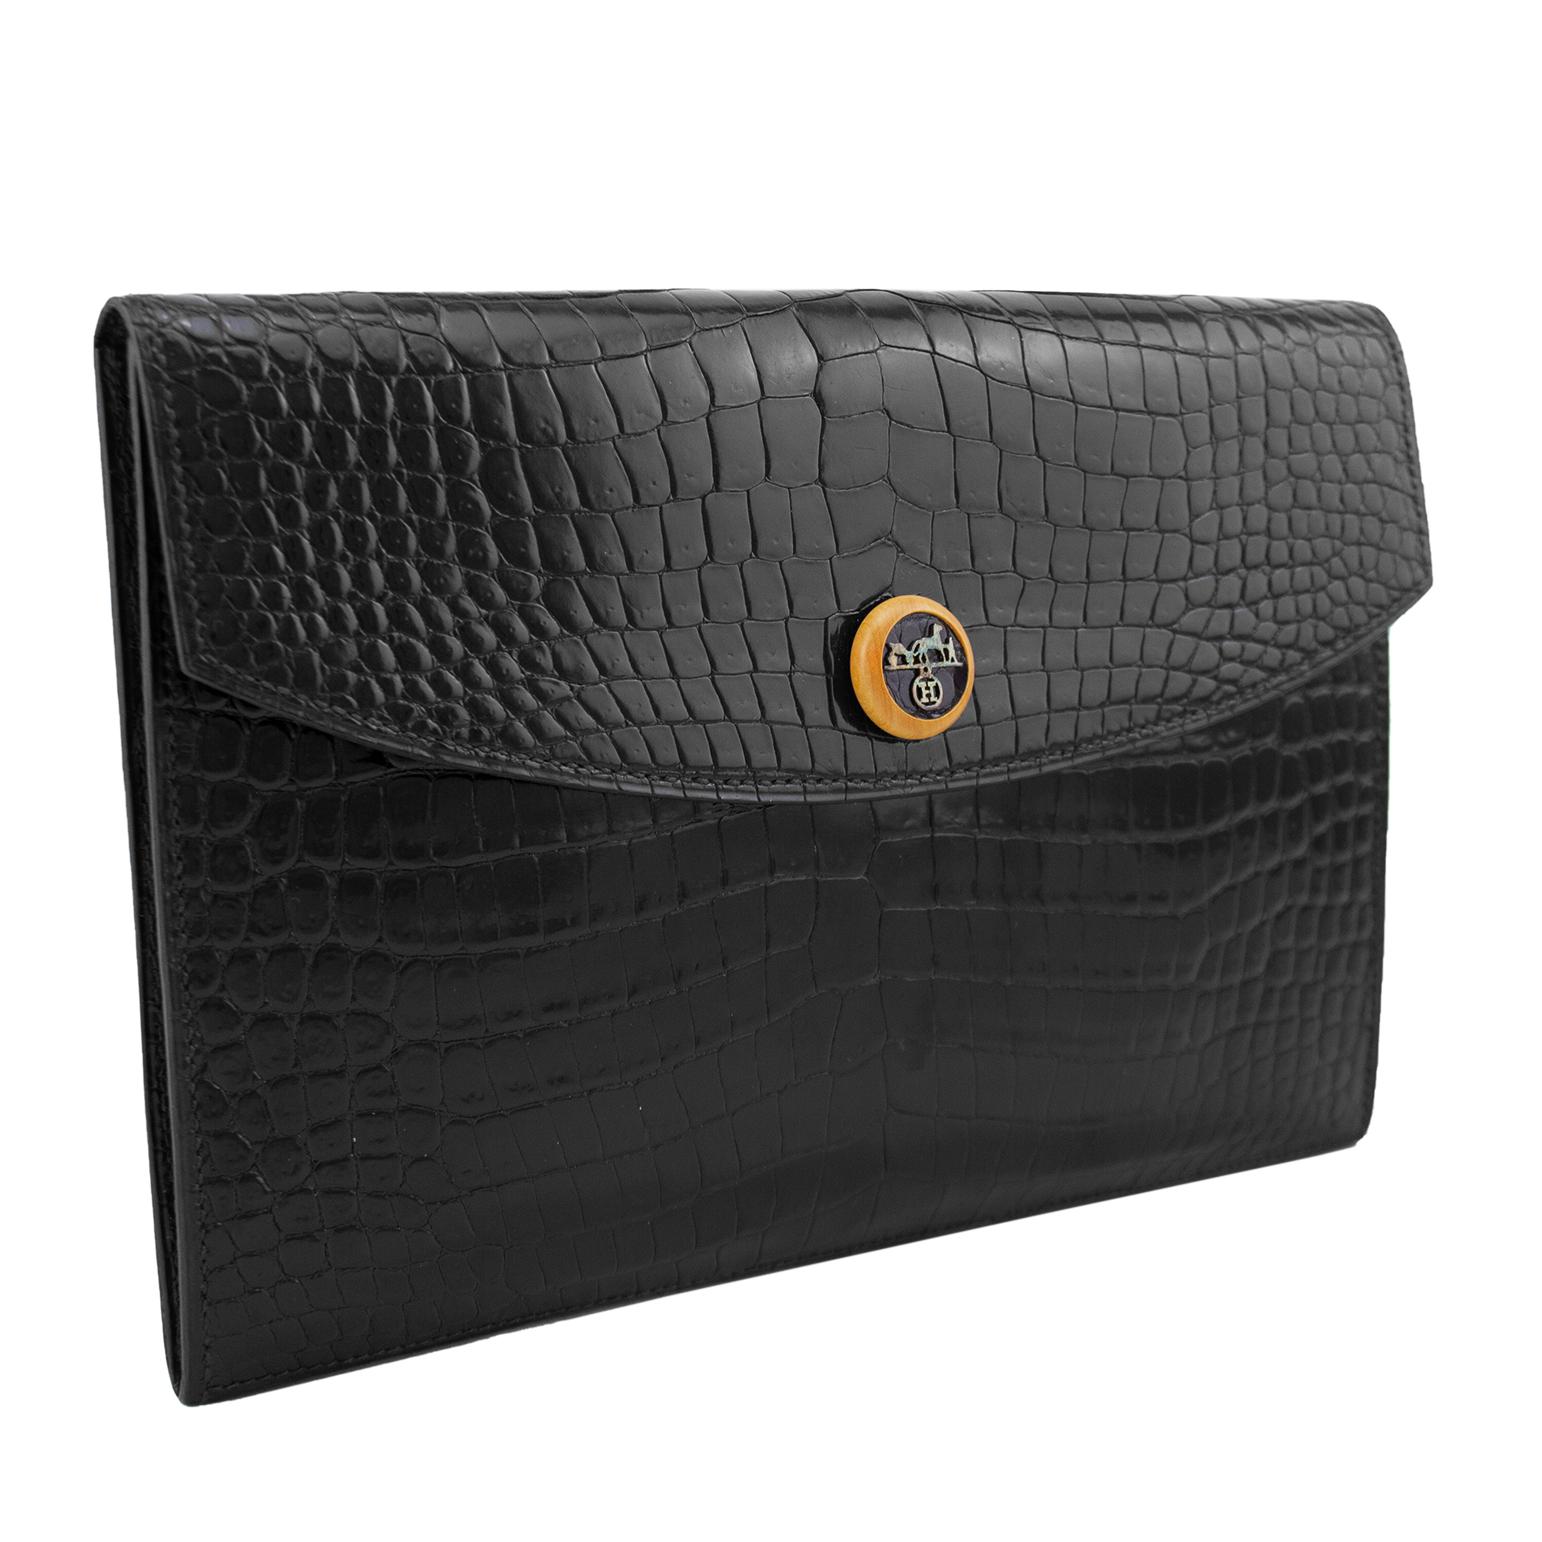 Classic and elegant black crocodile effect Hermes Rio clutch from 1988. Envelope style with a single wood round button snap button closure embellished with an H and equestrian logo. Single large supple black leather interior compartment. Dates from